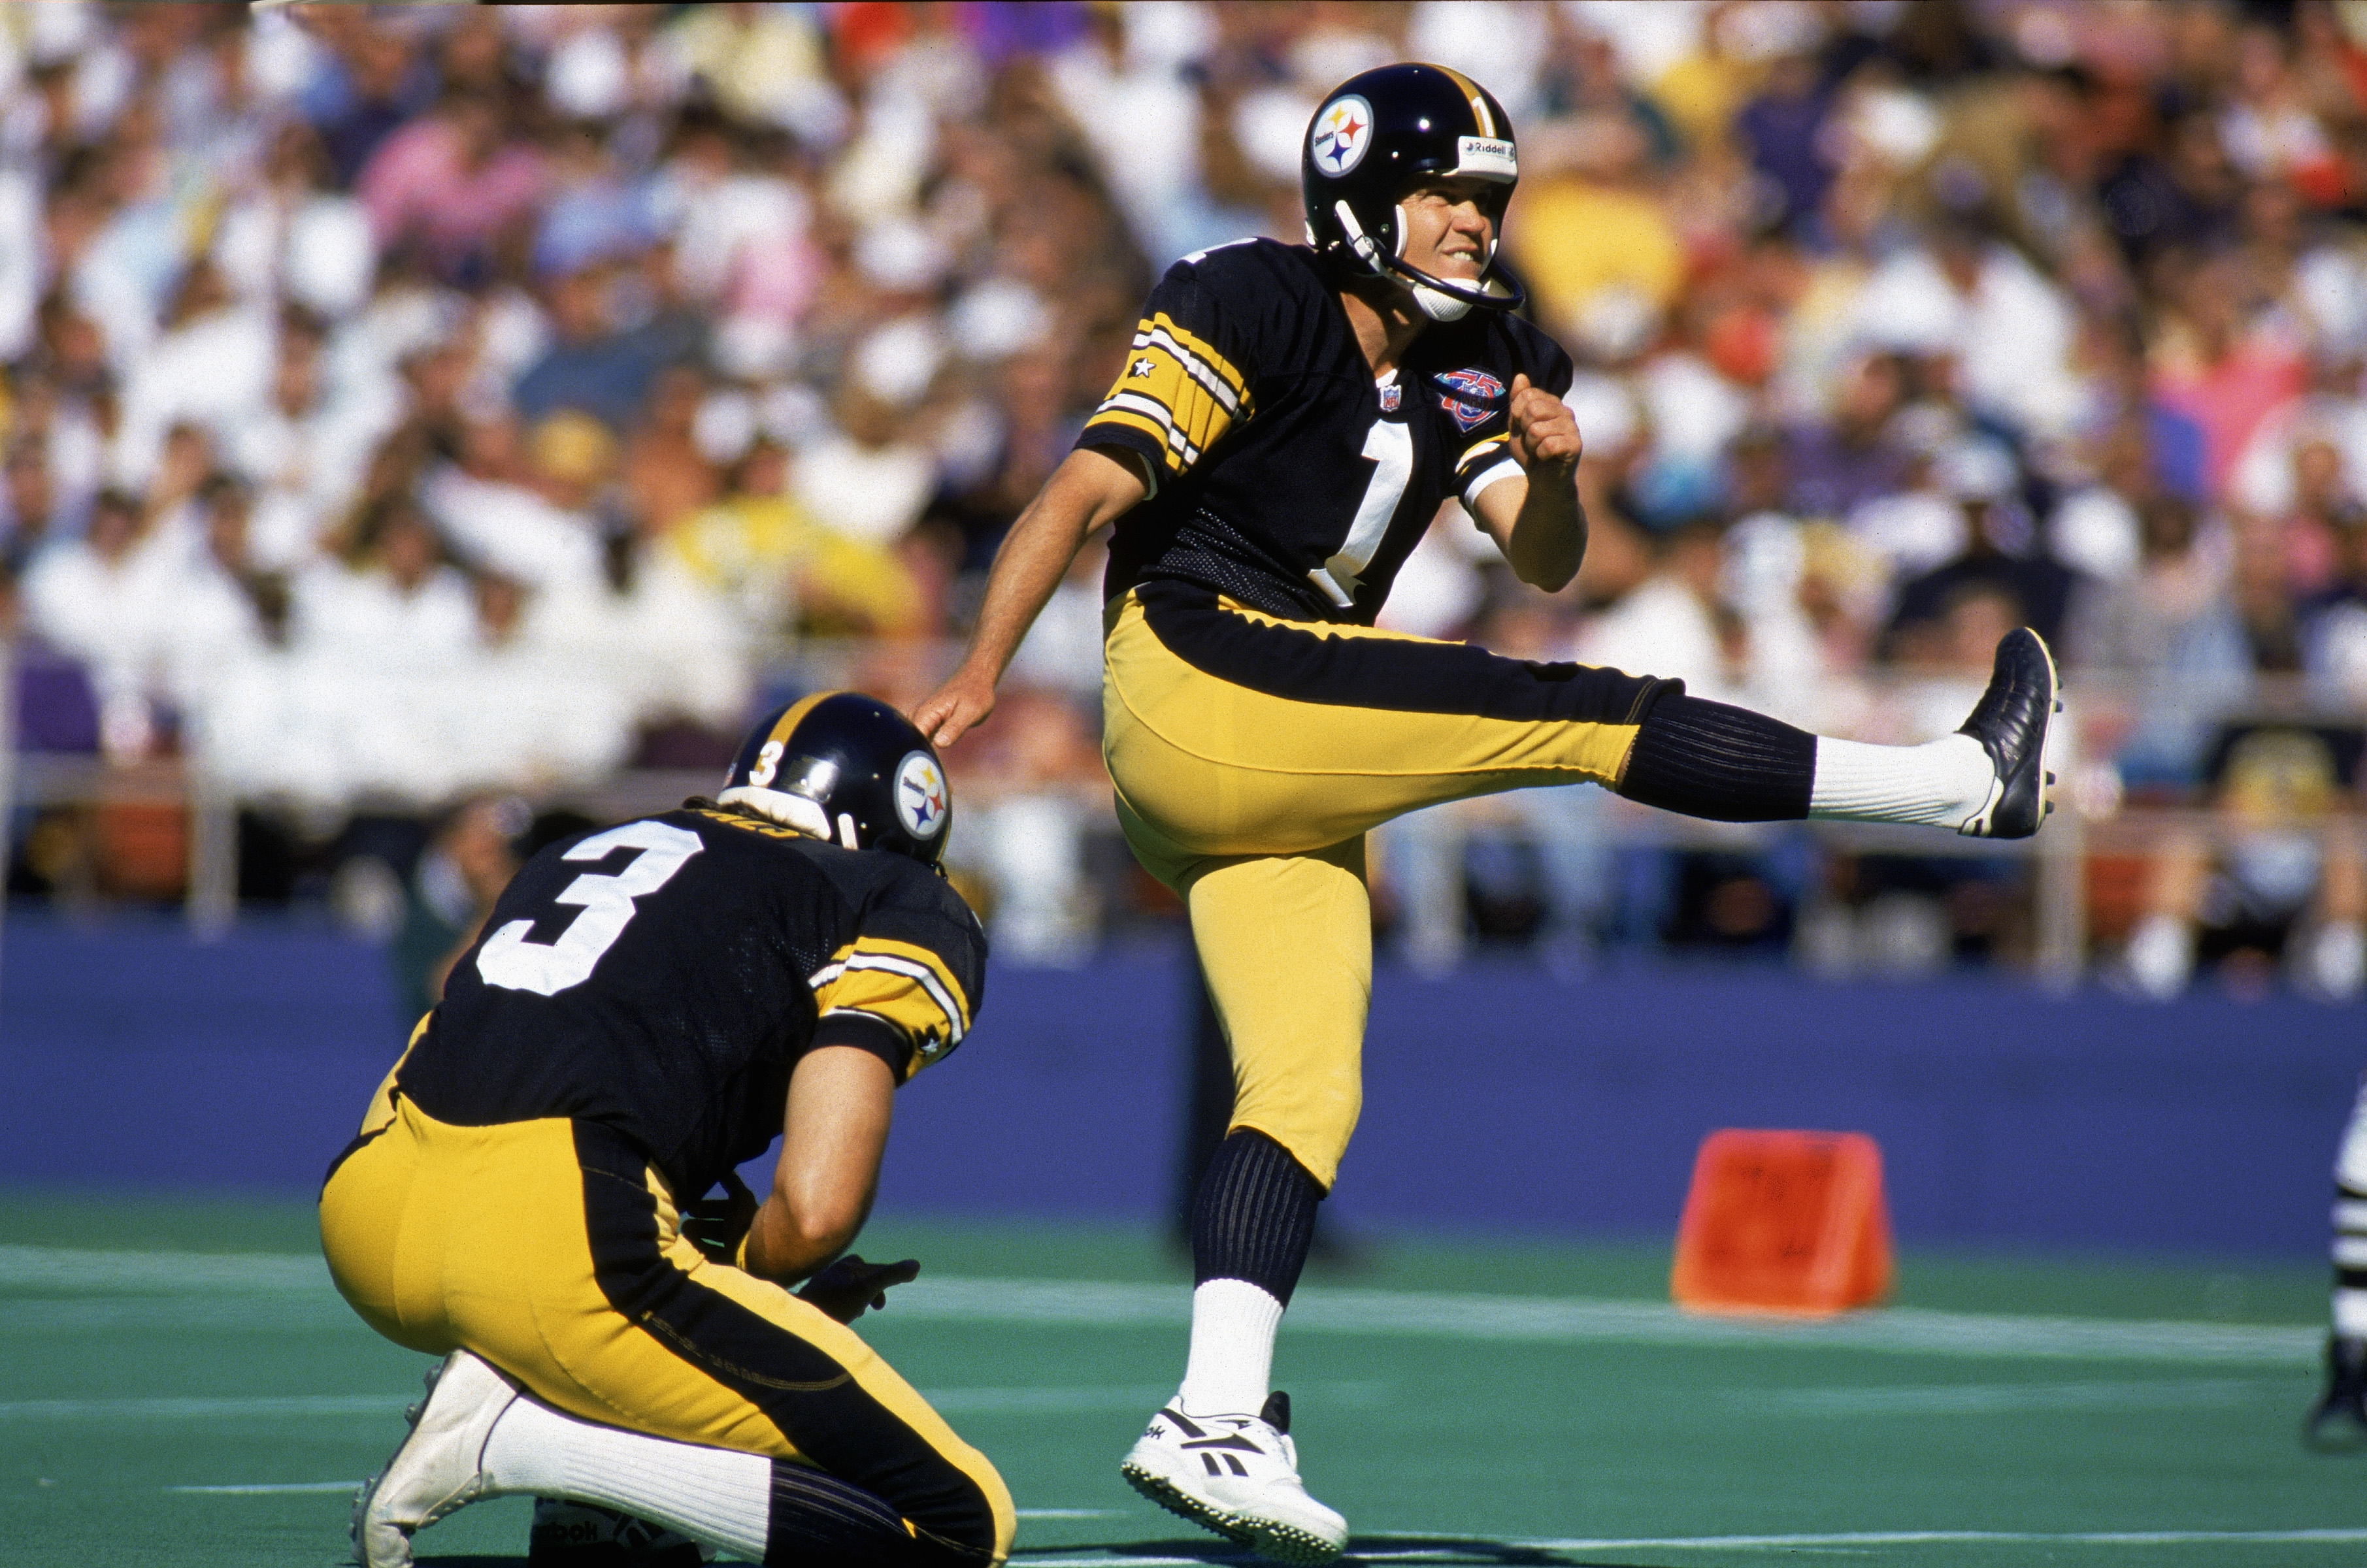 PITTSBURGH ?? OCTOBER 16:  Place kicker Gary Anderson #1 of the Pittsburgh Steelers follows through on a kick during a NFL game against the Cincinnati Bengals at Three Rivers Stadium on October 16, 1994 in Pittsburgh, Pennsylvania.  The Steelers defeated